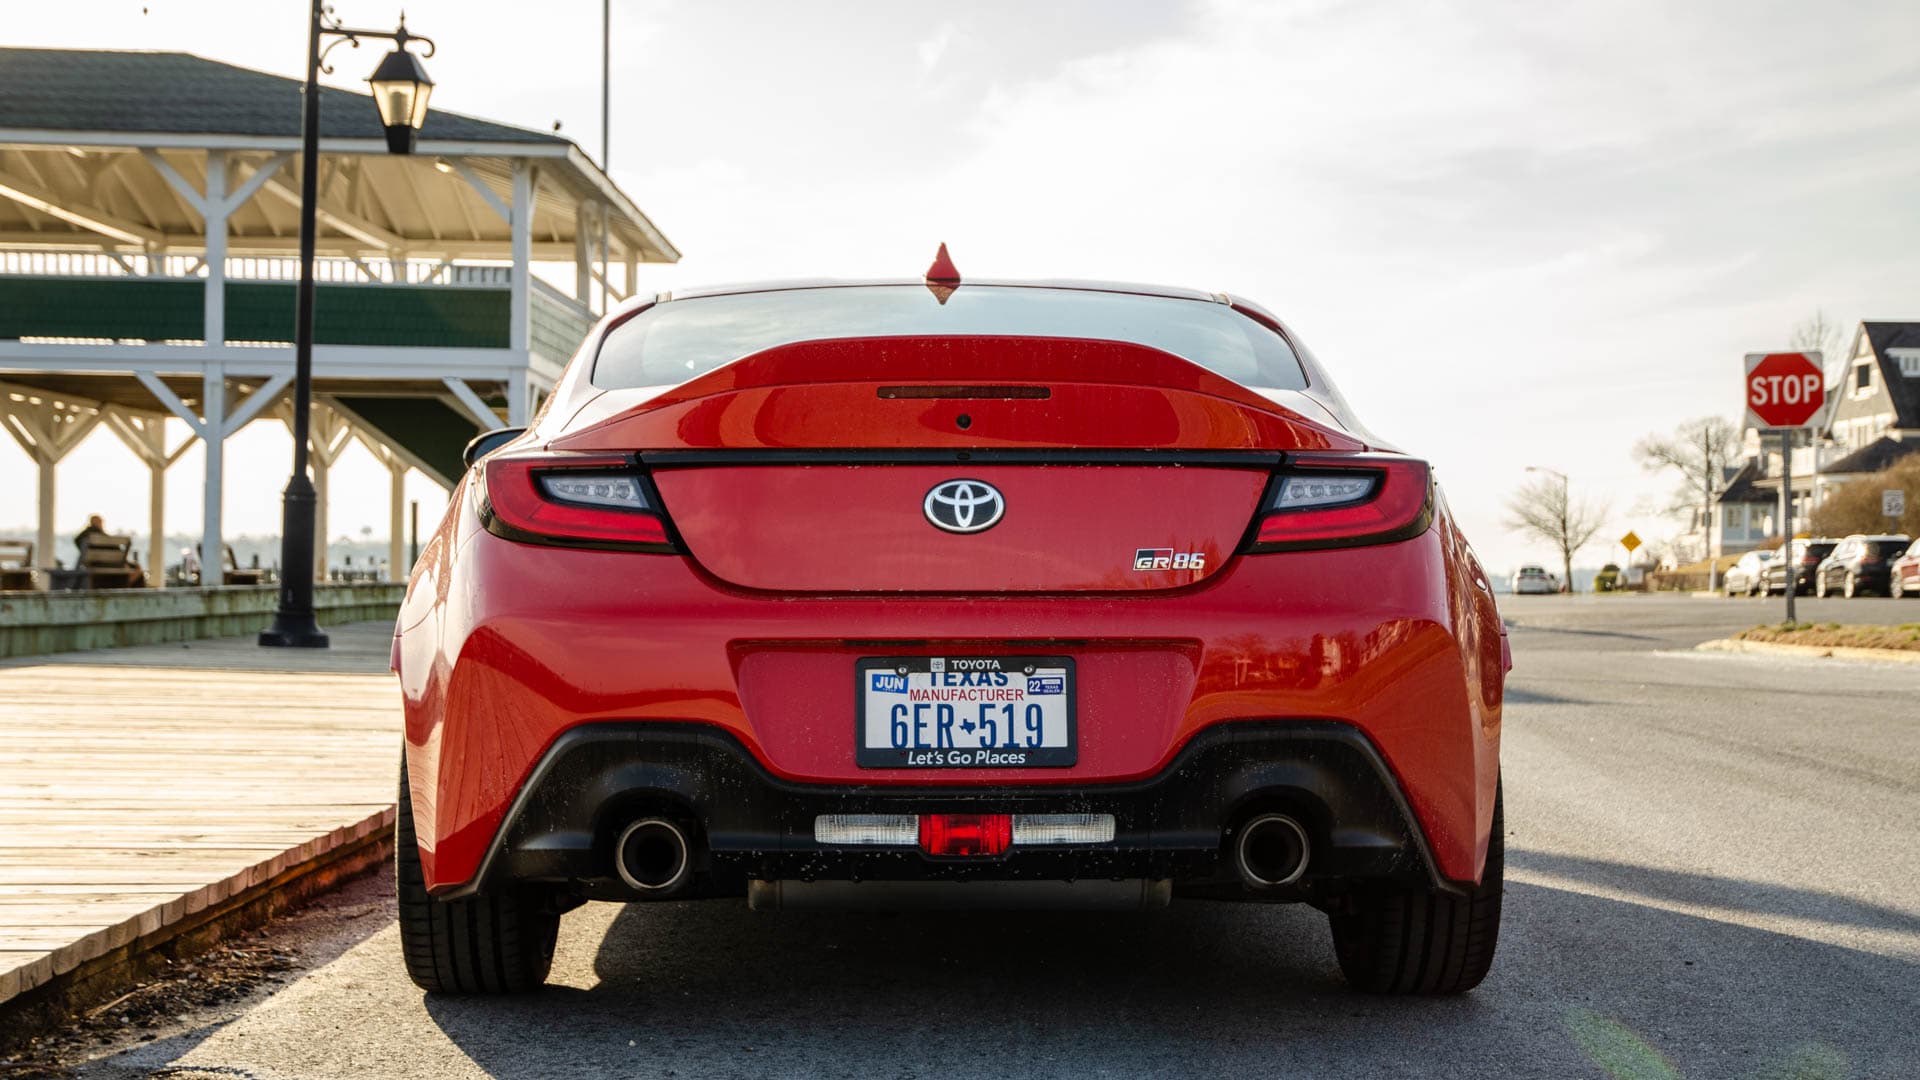 The Torque Report has reported that the Toyota GR 86 has arrived in the US with 228 horsepower.